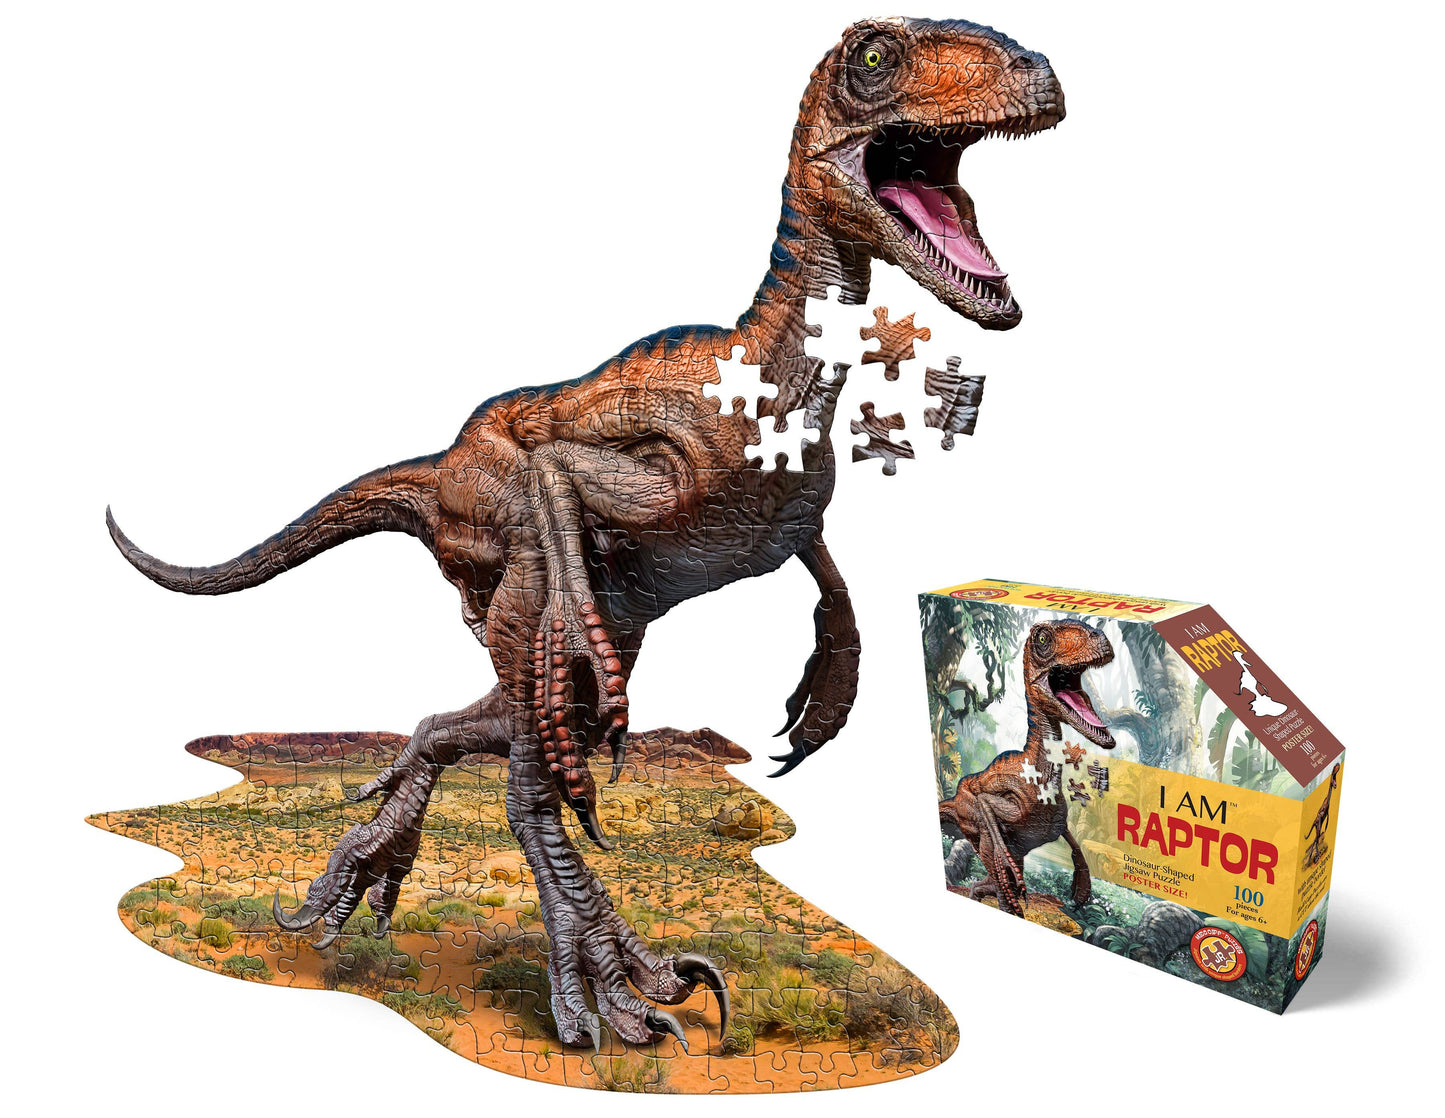 Madd Capp Games & Puzzles - I AM Raptor 100 piece jigsaw puzzle - gift